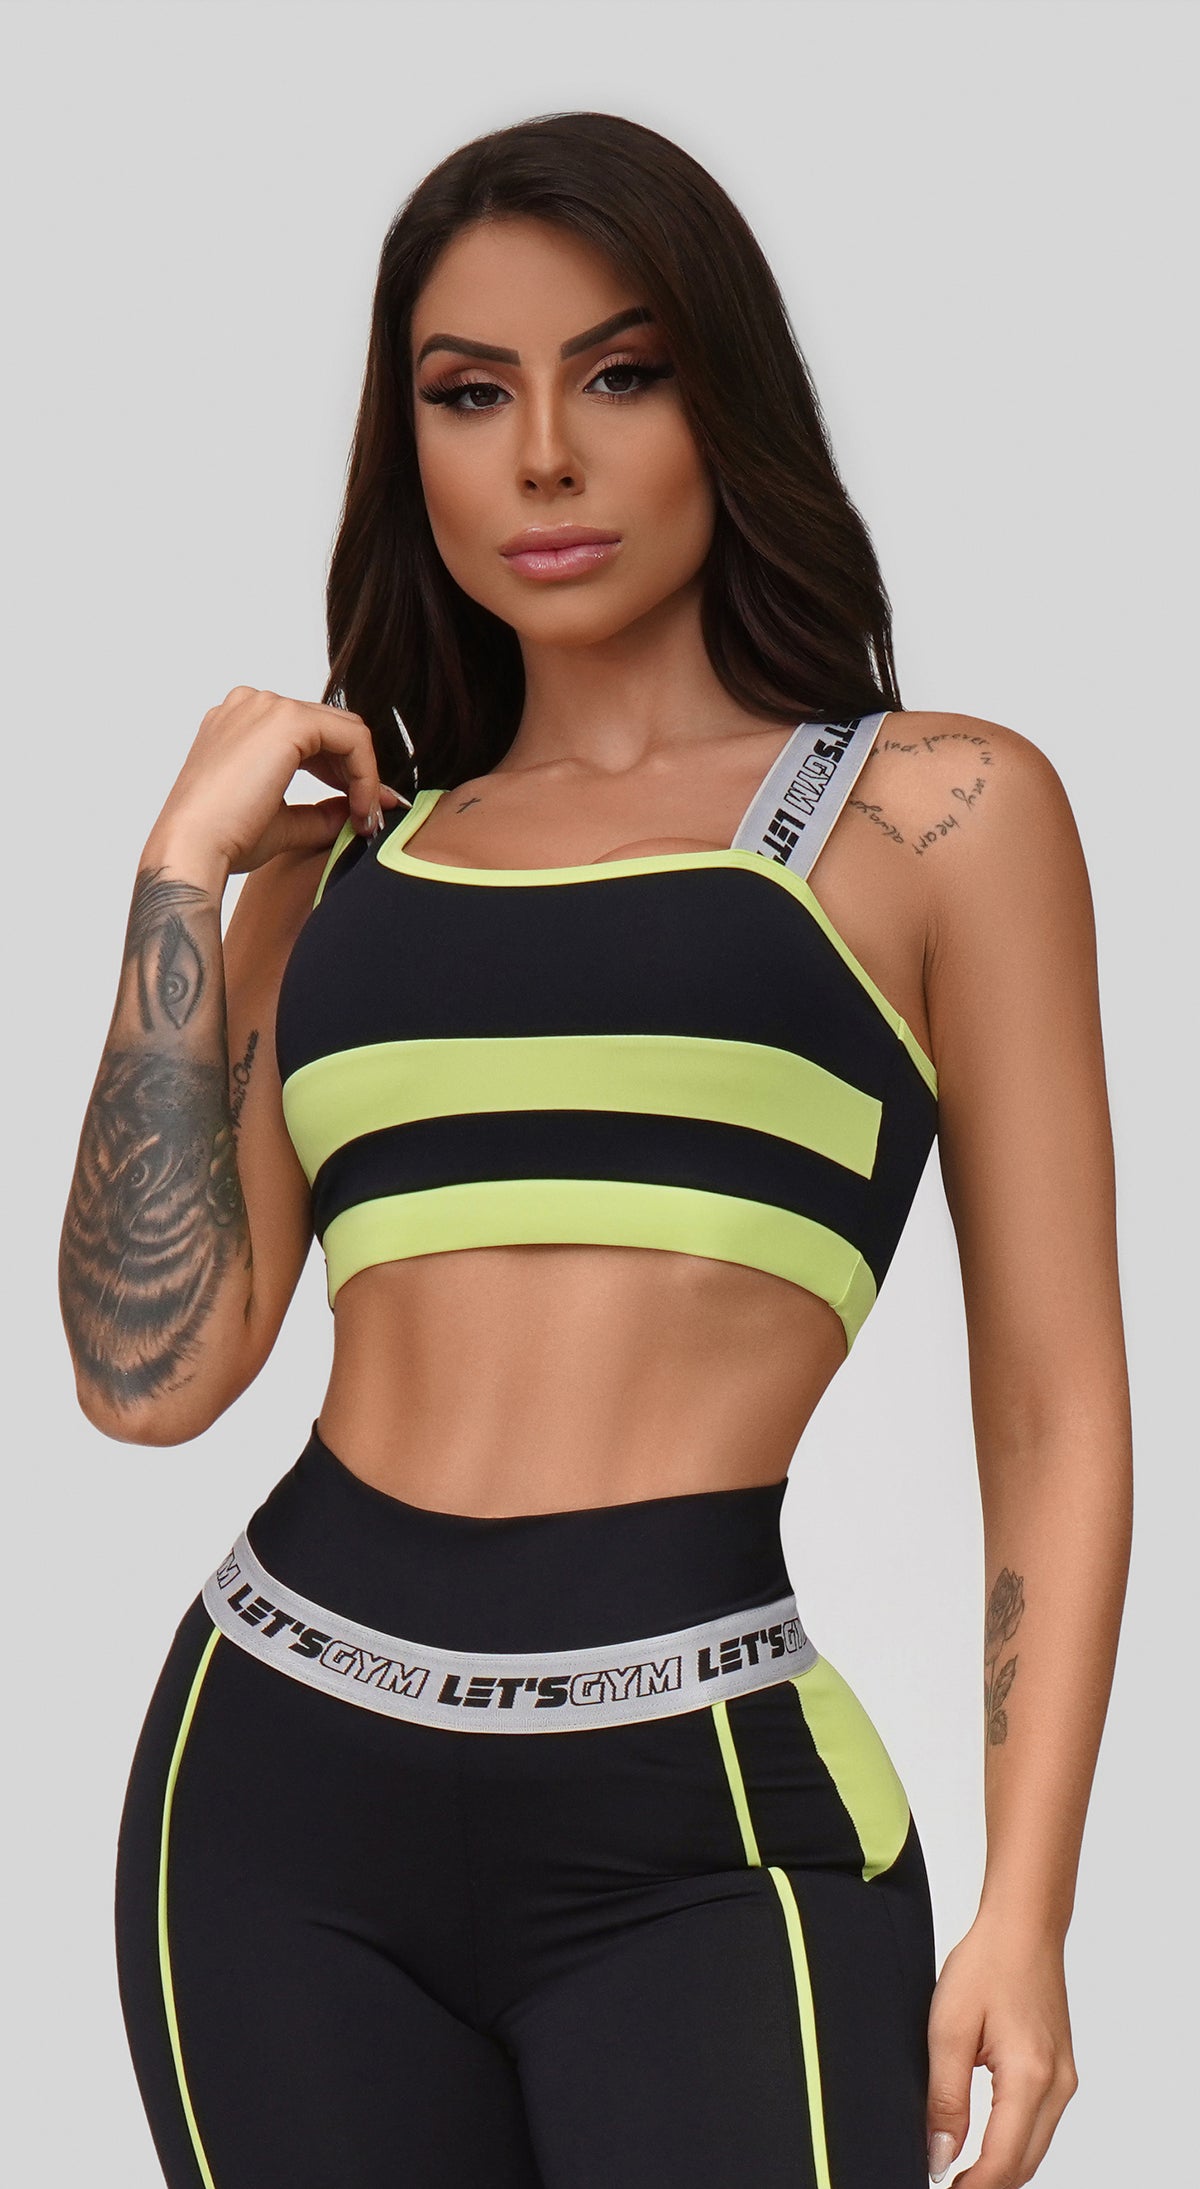 Page 2 - Women's Gym Tops, Workout & Sports Crop Tops